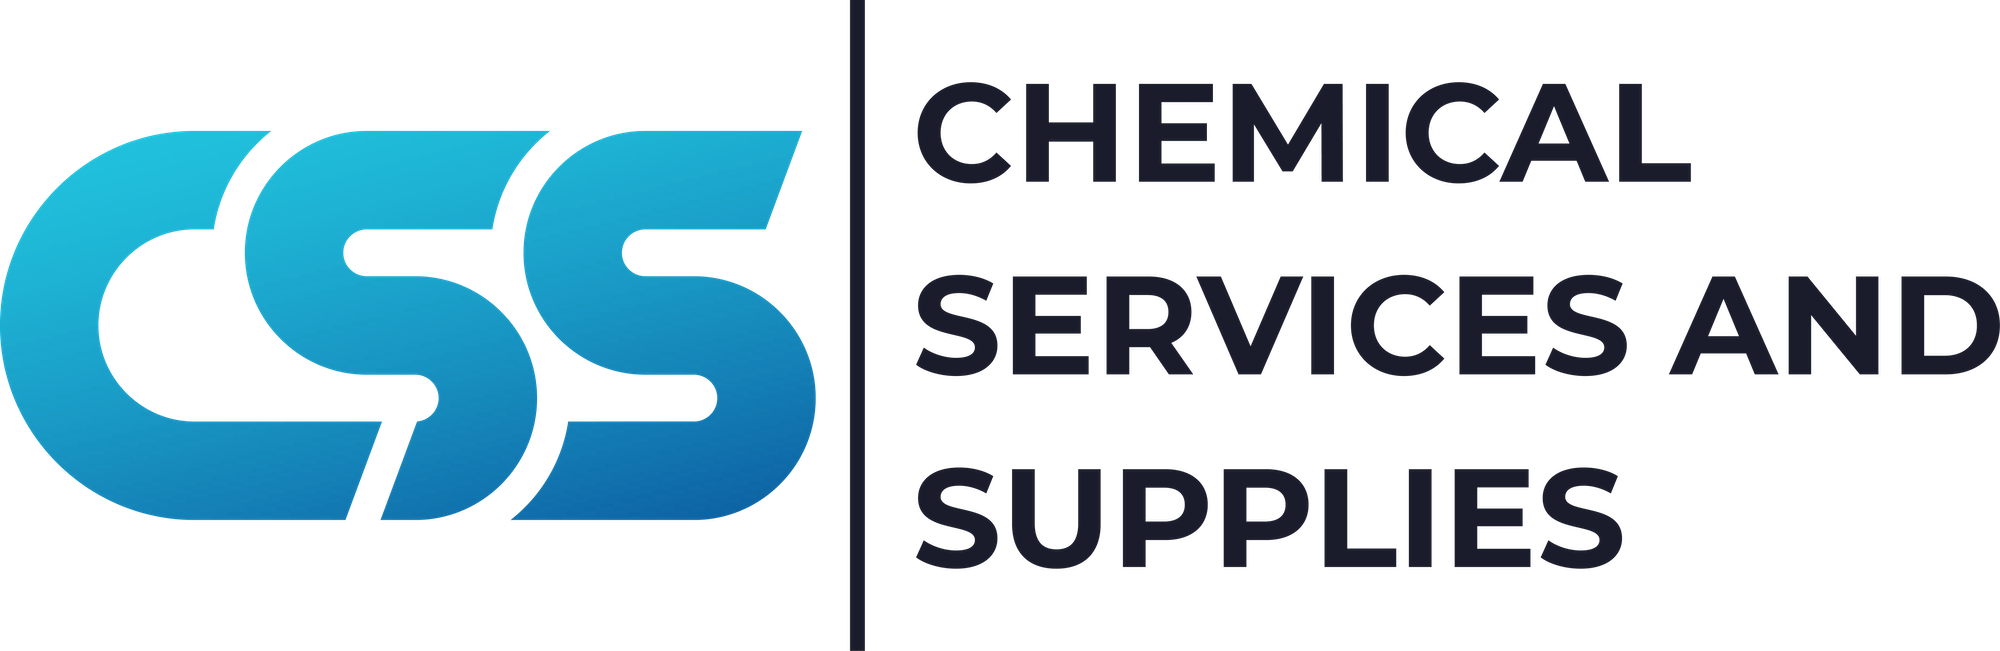 Chemical Services & Supplies